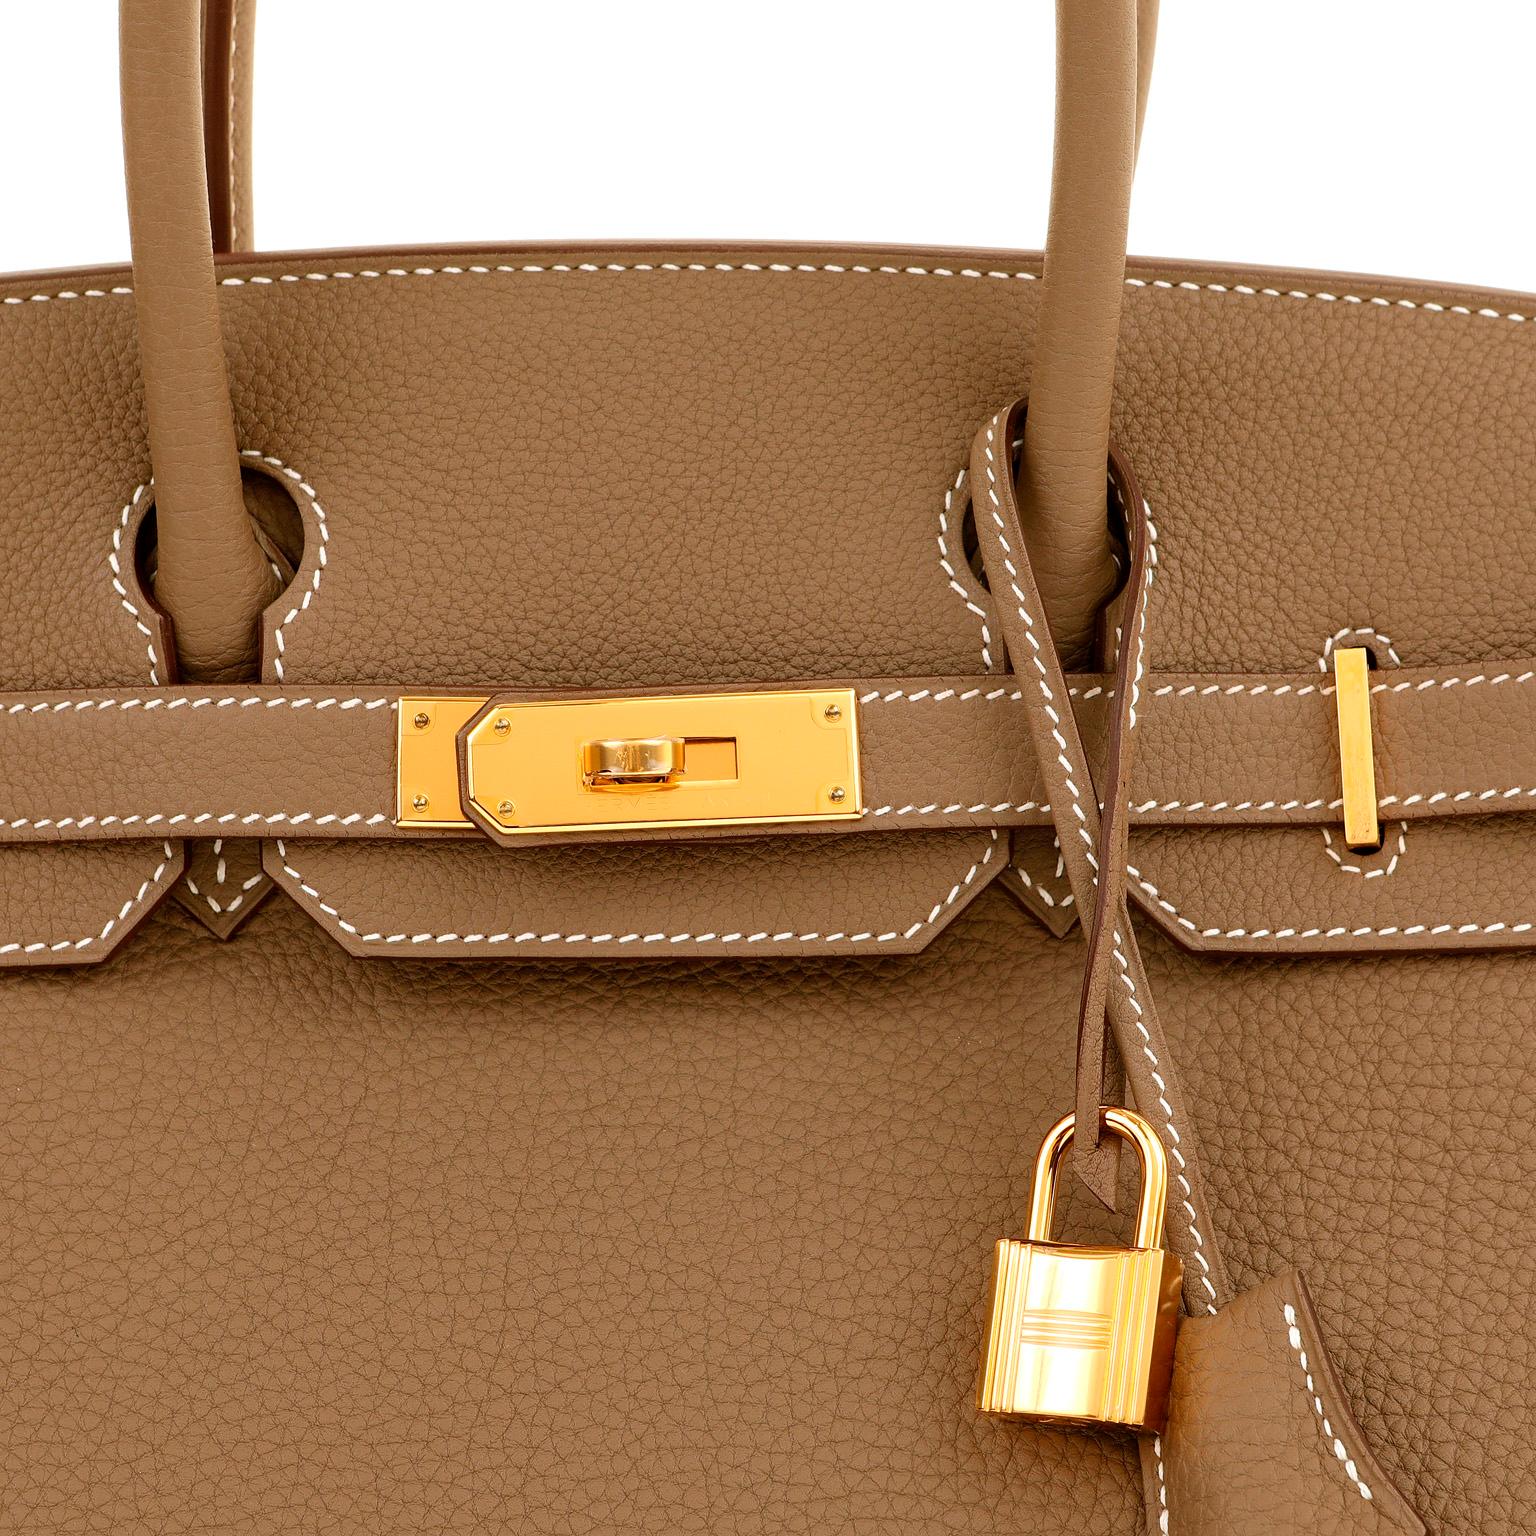 This authentic Hermès 30 cm Taupe Togo Birkin is in pristine unworn condition; never carried.   Hand stitched by skilled craftsmen, wait lists of a year or more are common for the Hermès Birkin. Neutral greige taupe Togo is uniquely accented with